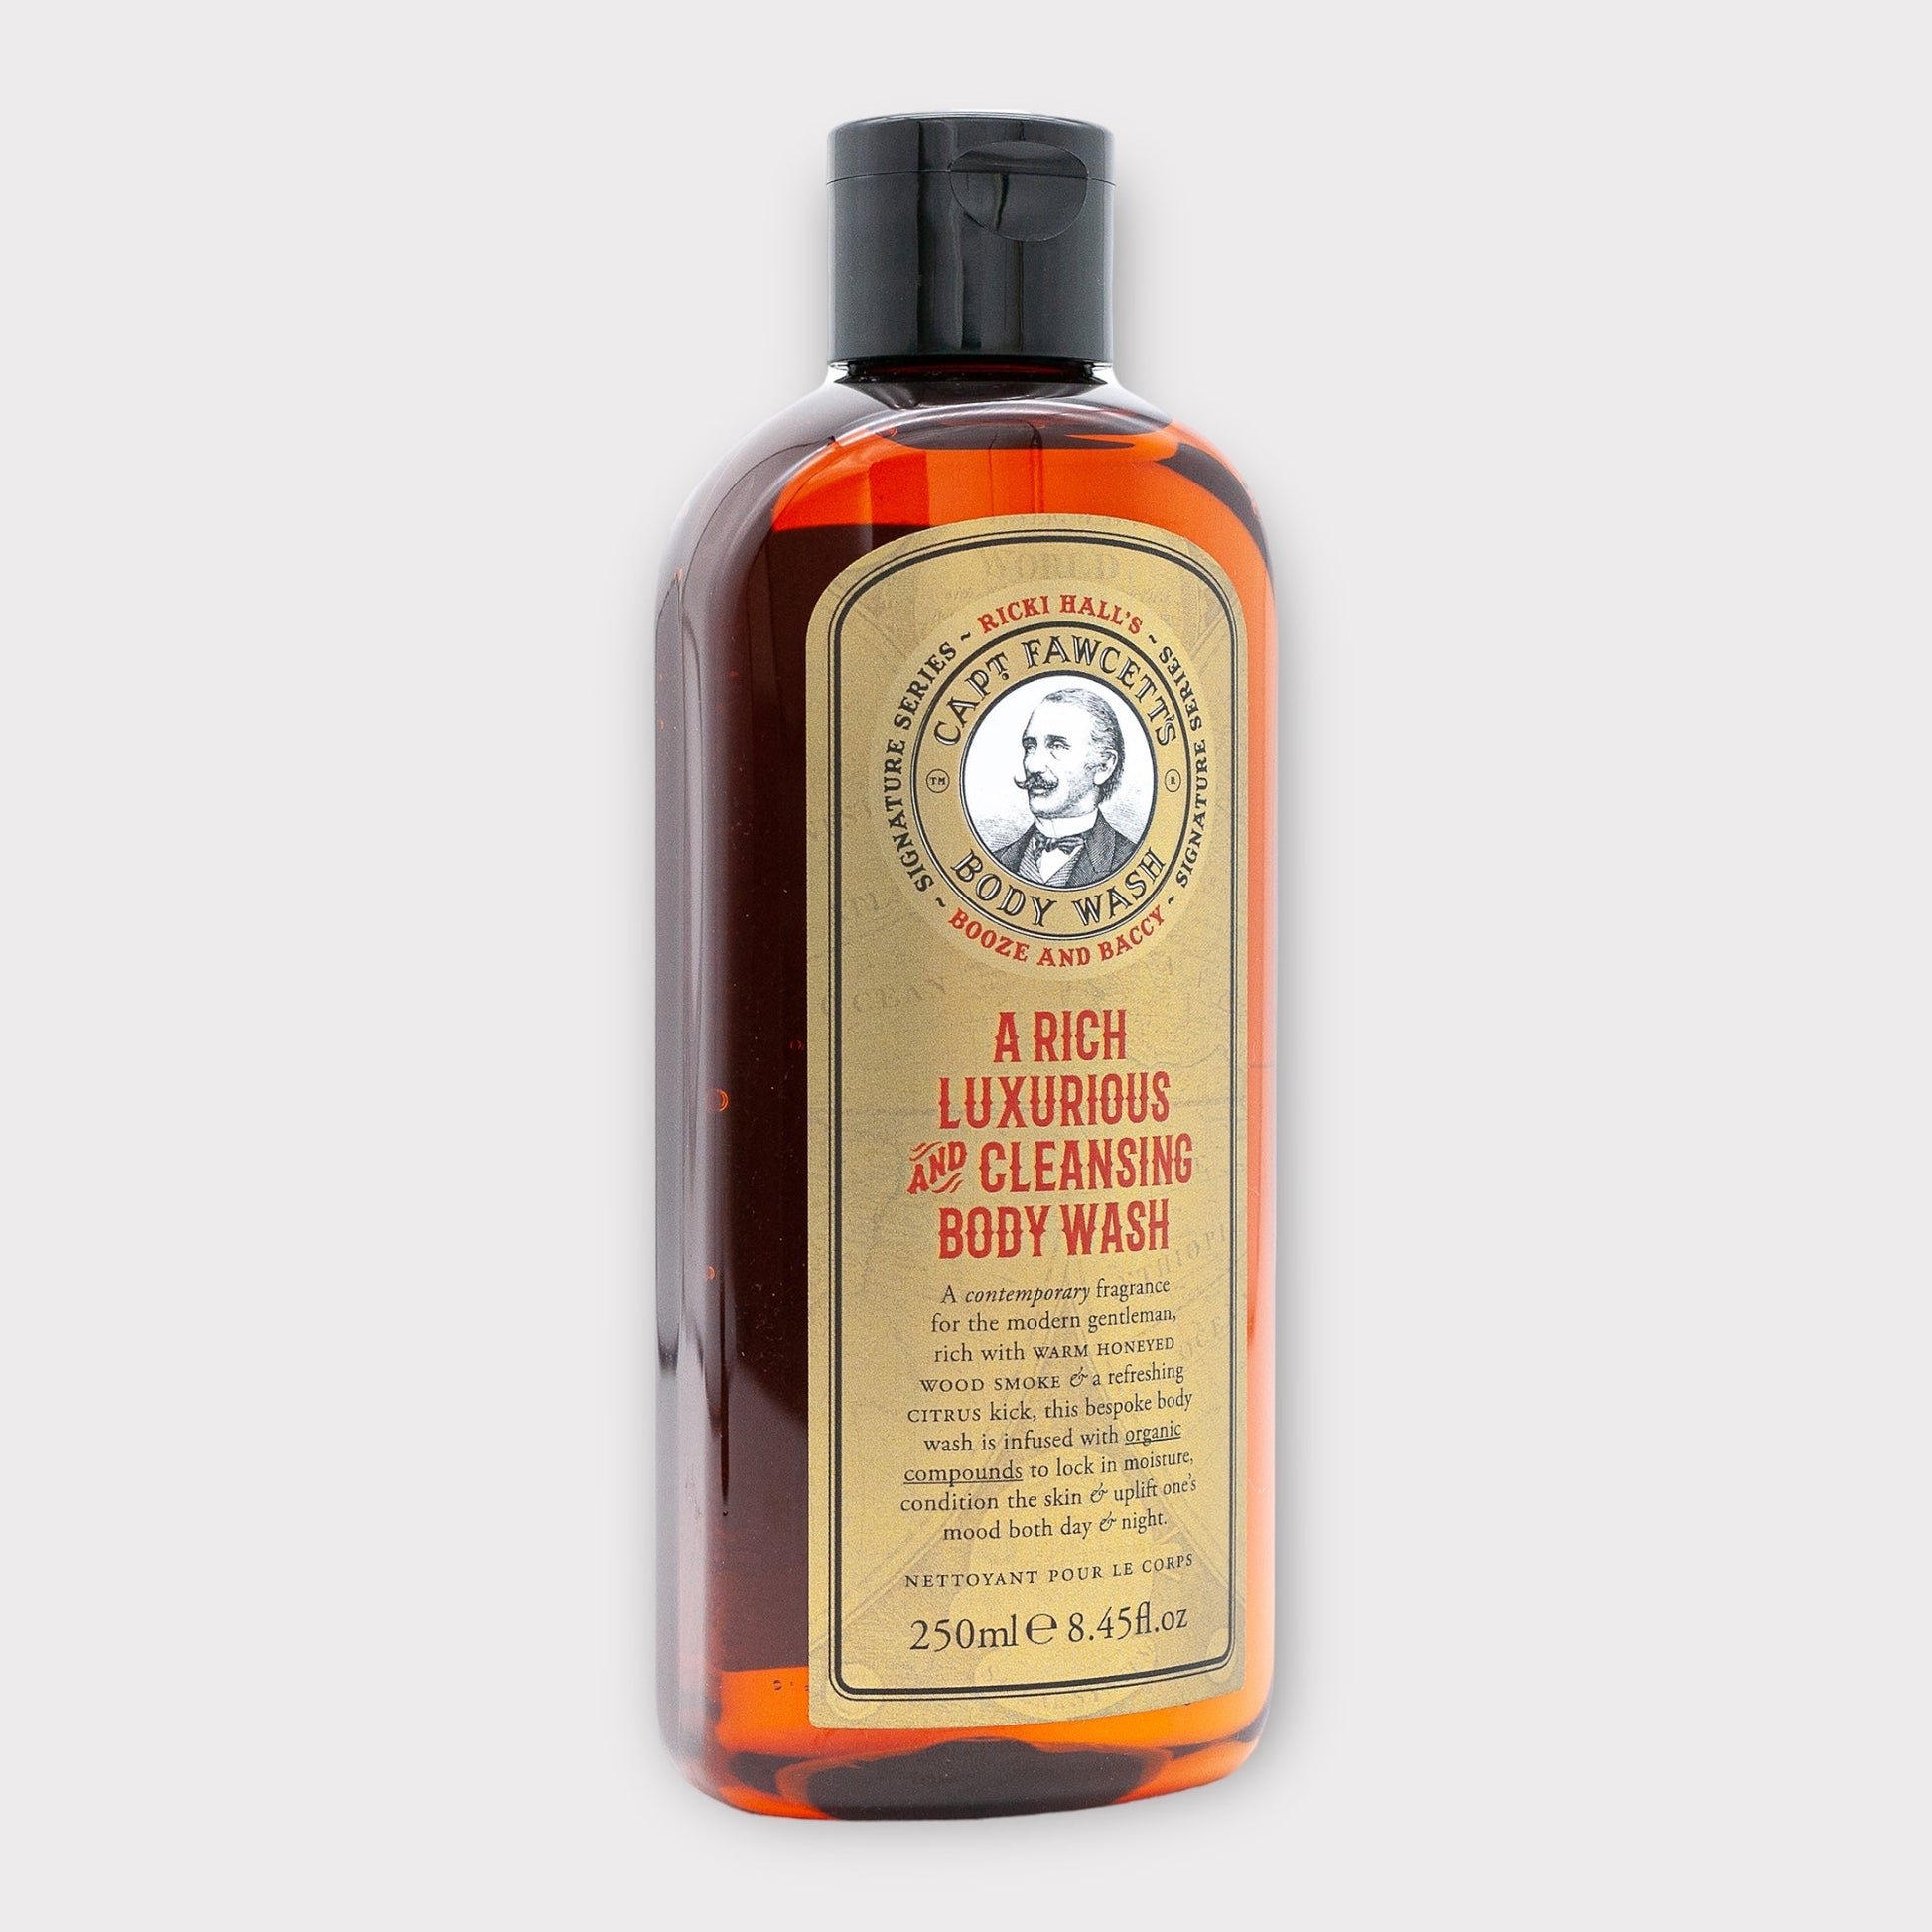 Captain Fawcett's Ricki Hall Booze & Baccy Body Wash - 250ml - Wash it Out